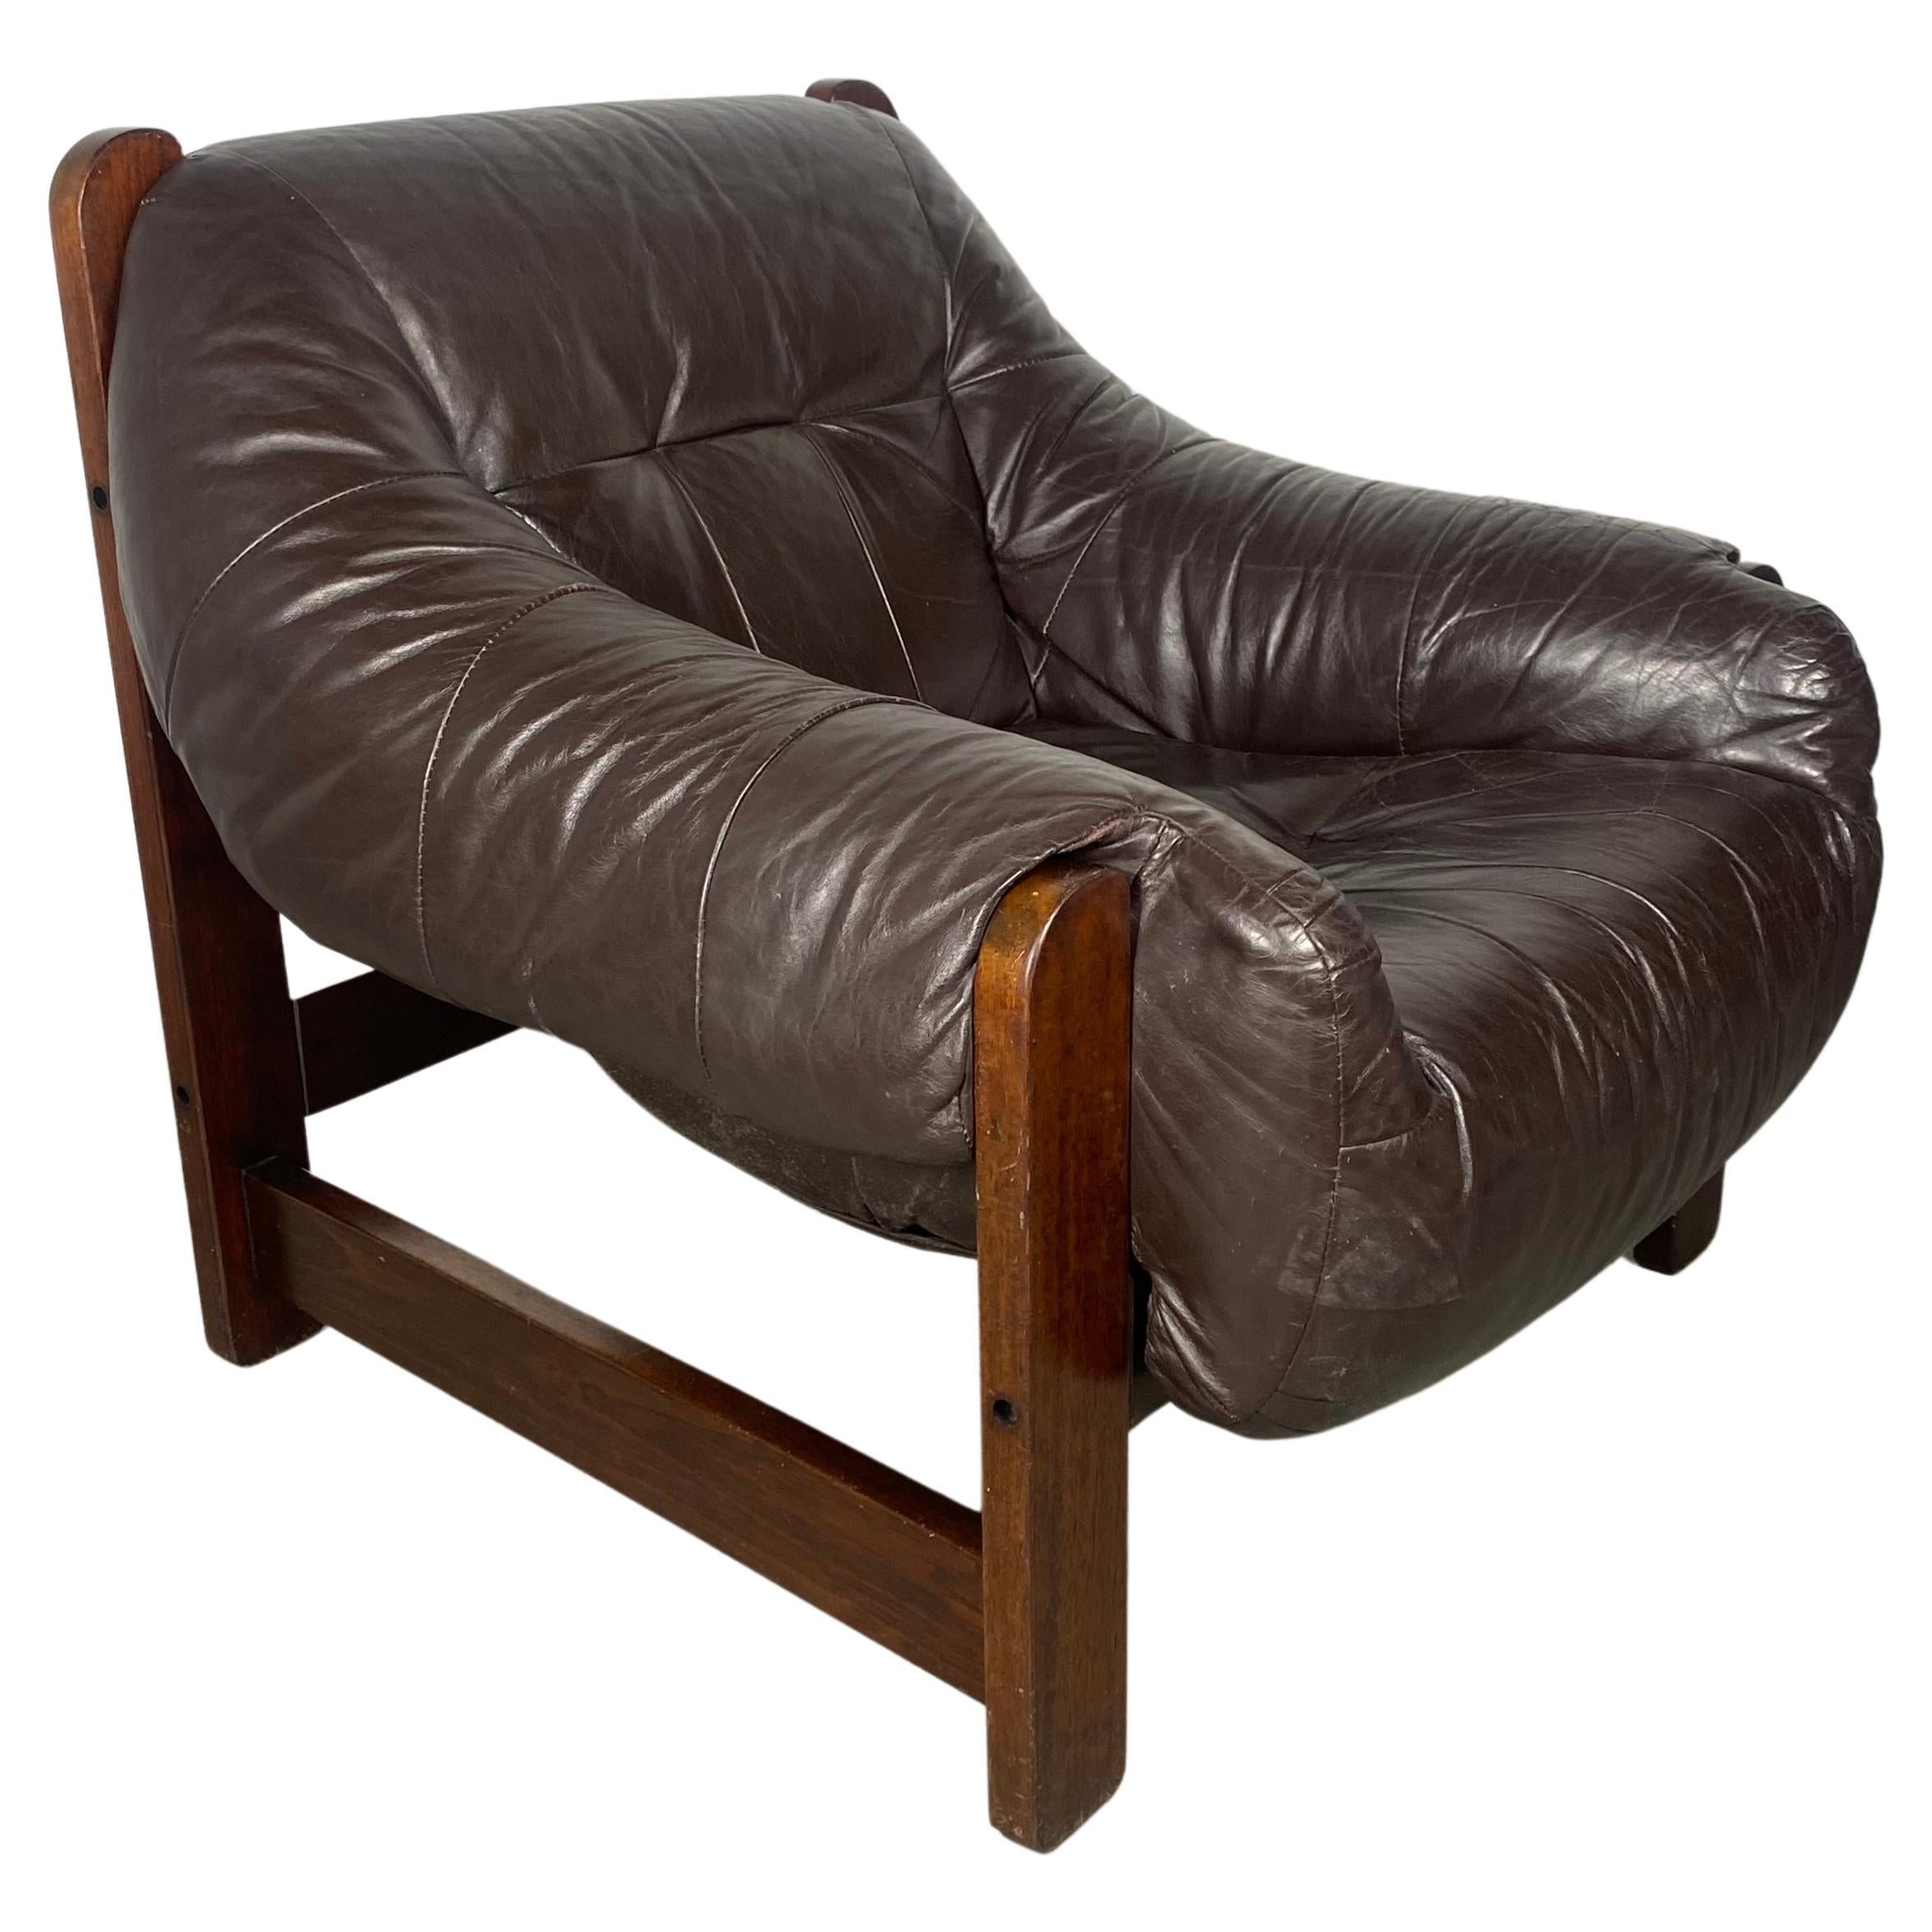 Brazilian Rosewood and Leather Lounge Chair Designed by Moveis Corazza